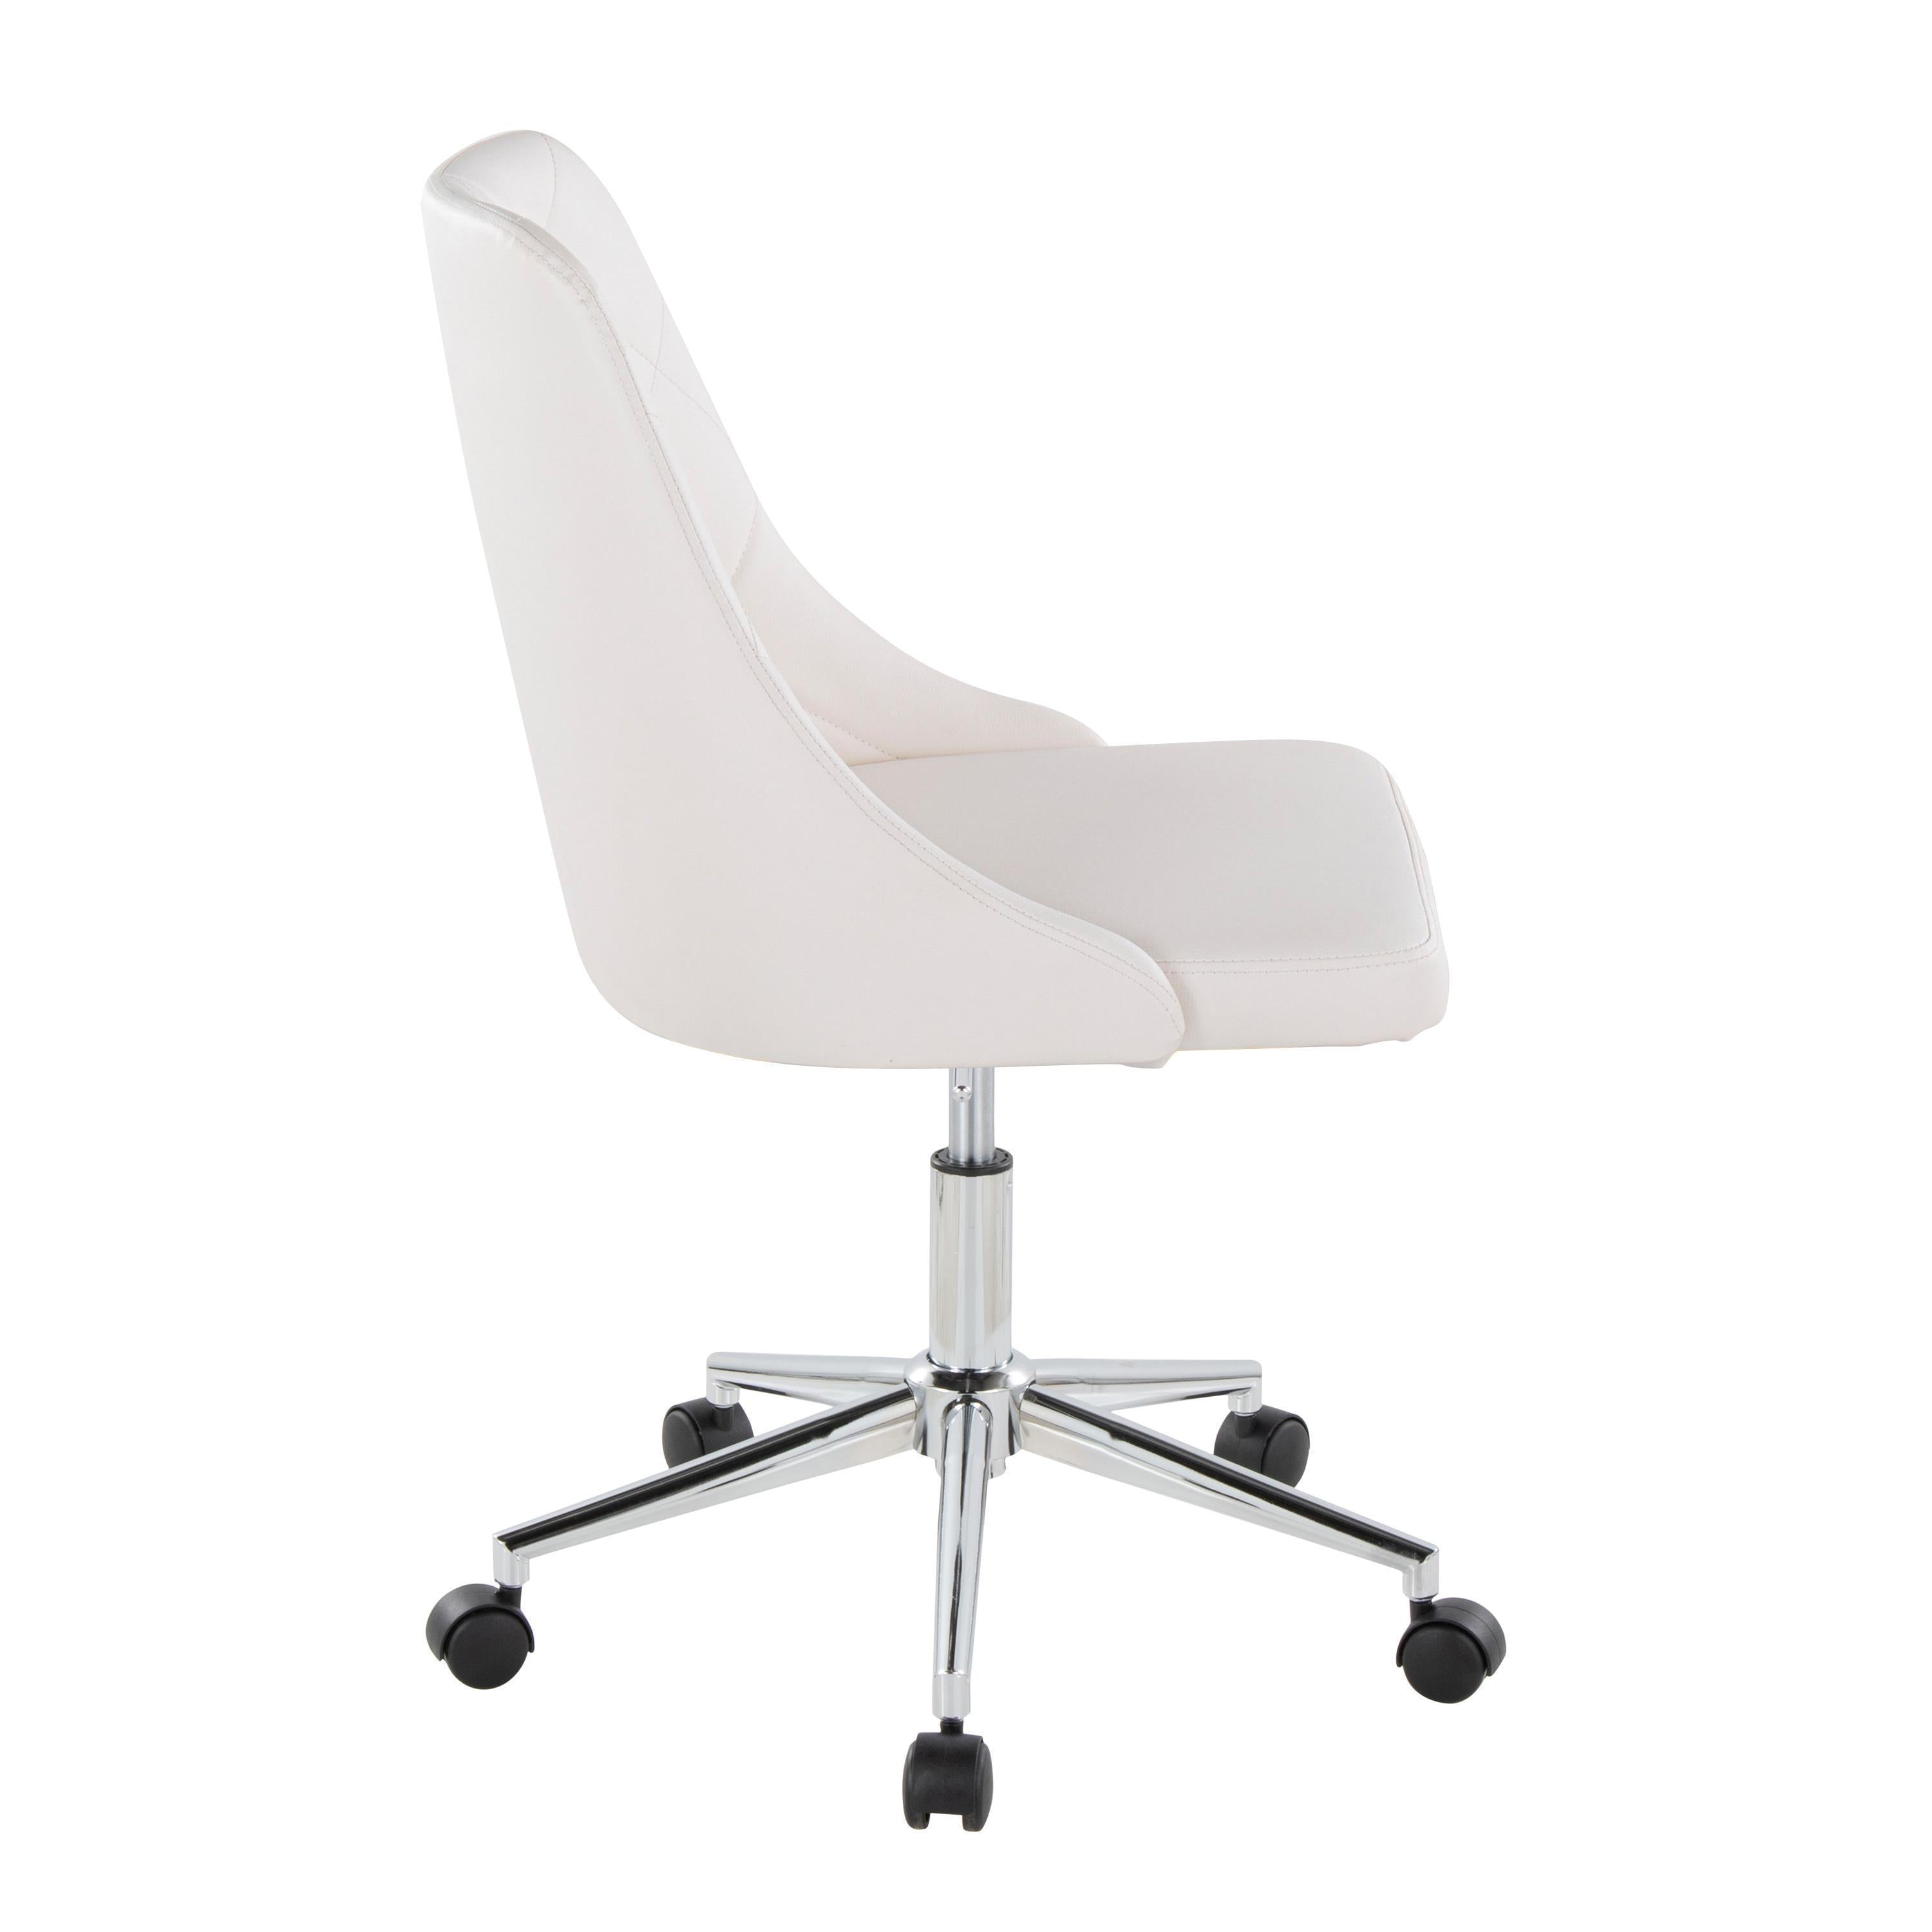 Contemporary Swivel Task Chair with Casters in Chrome Metal and White Faux Leather